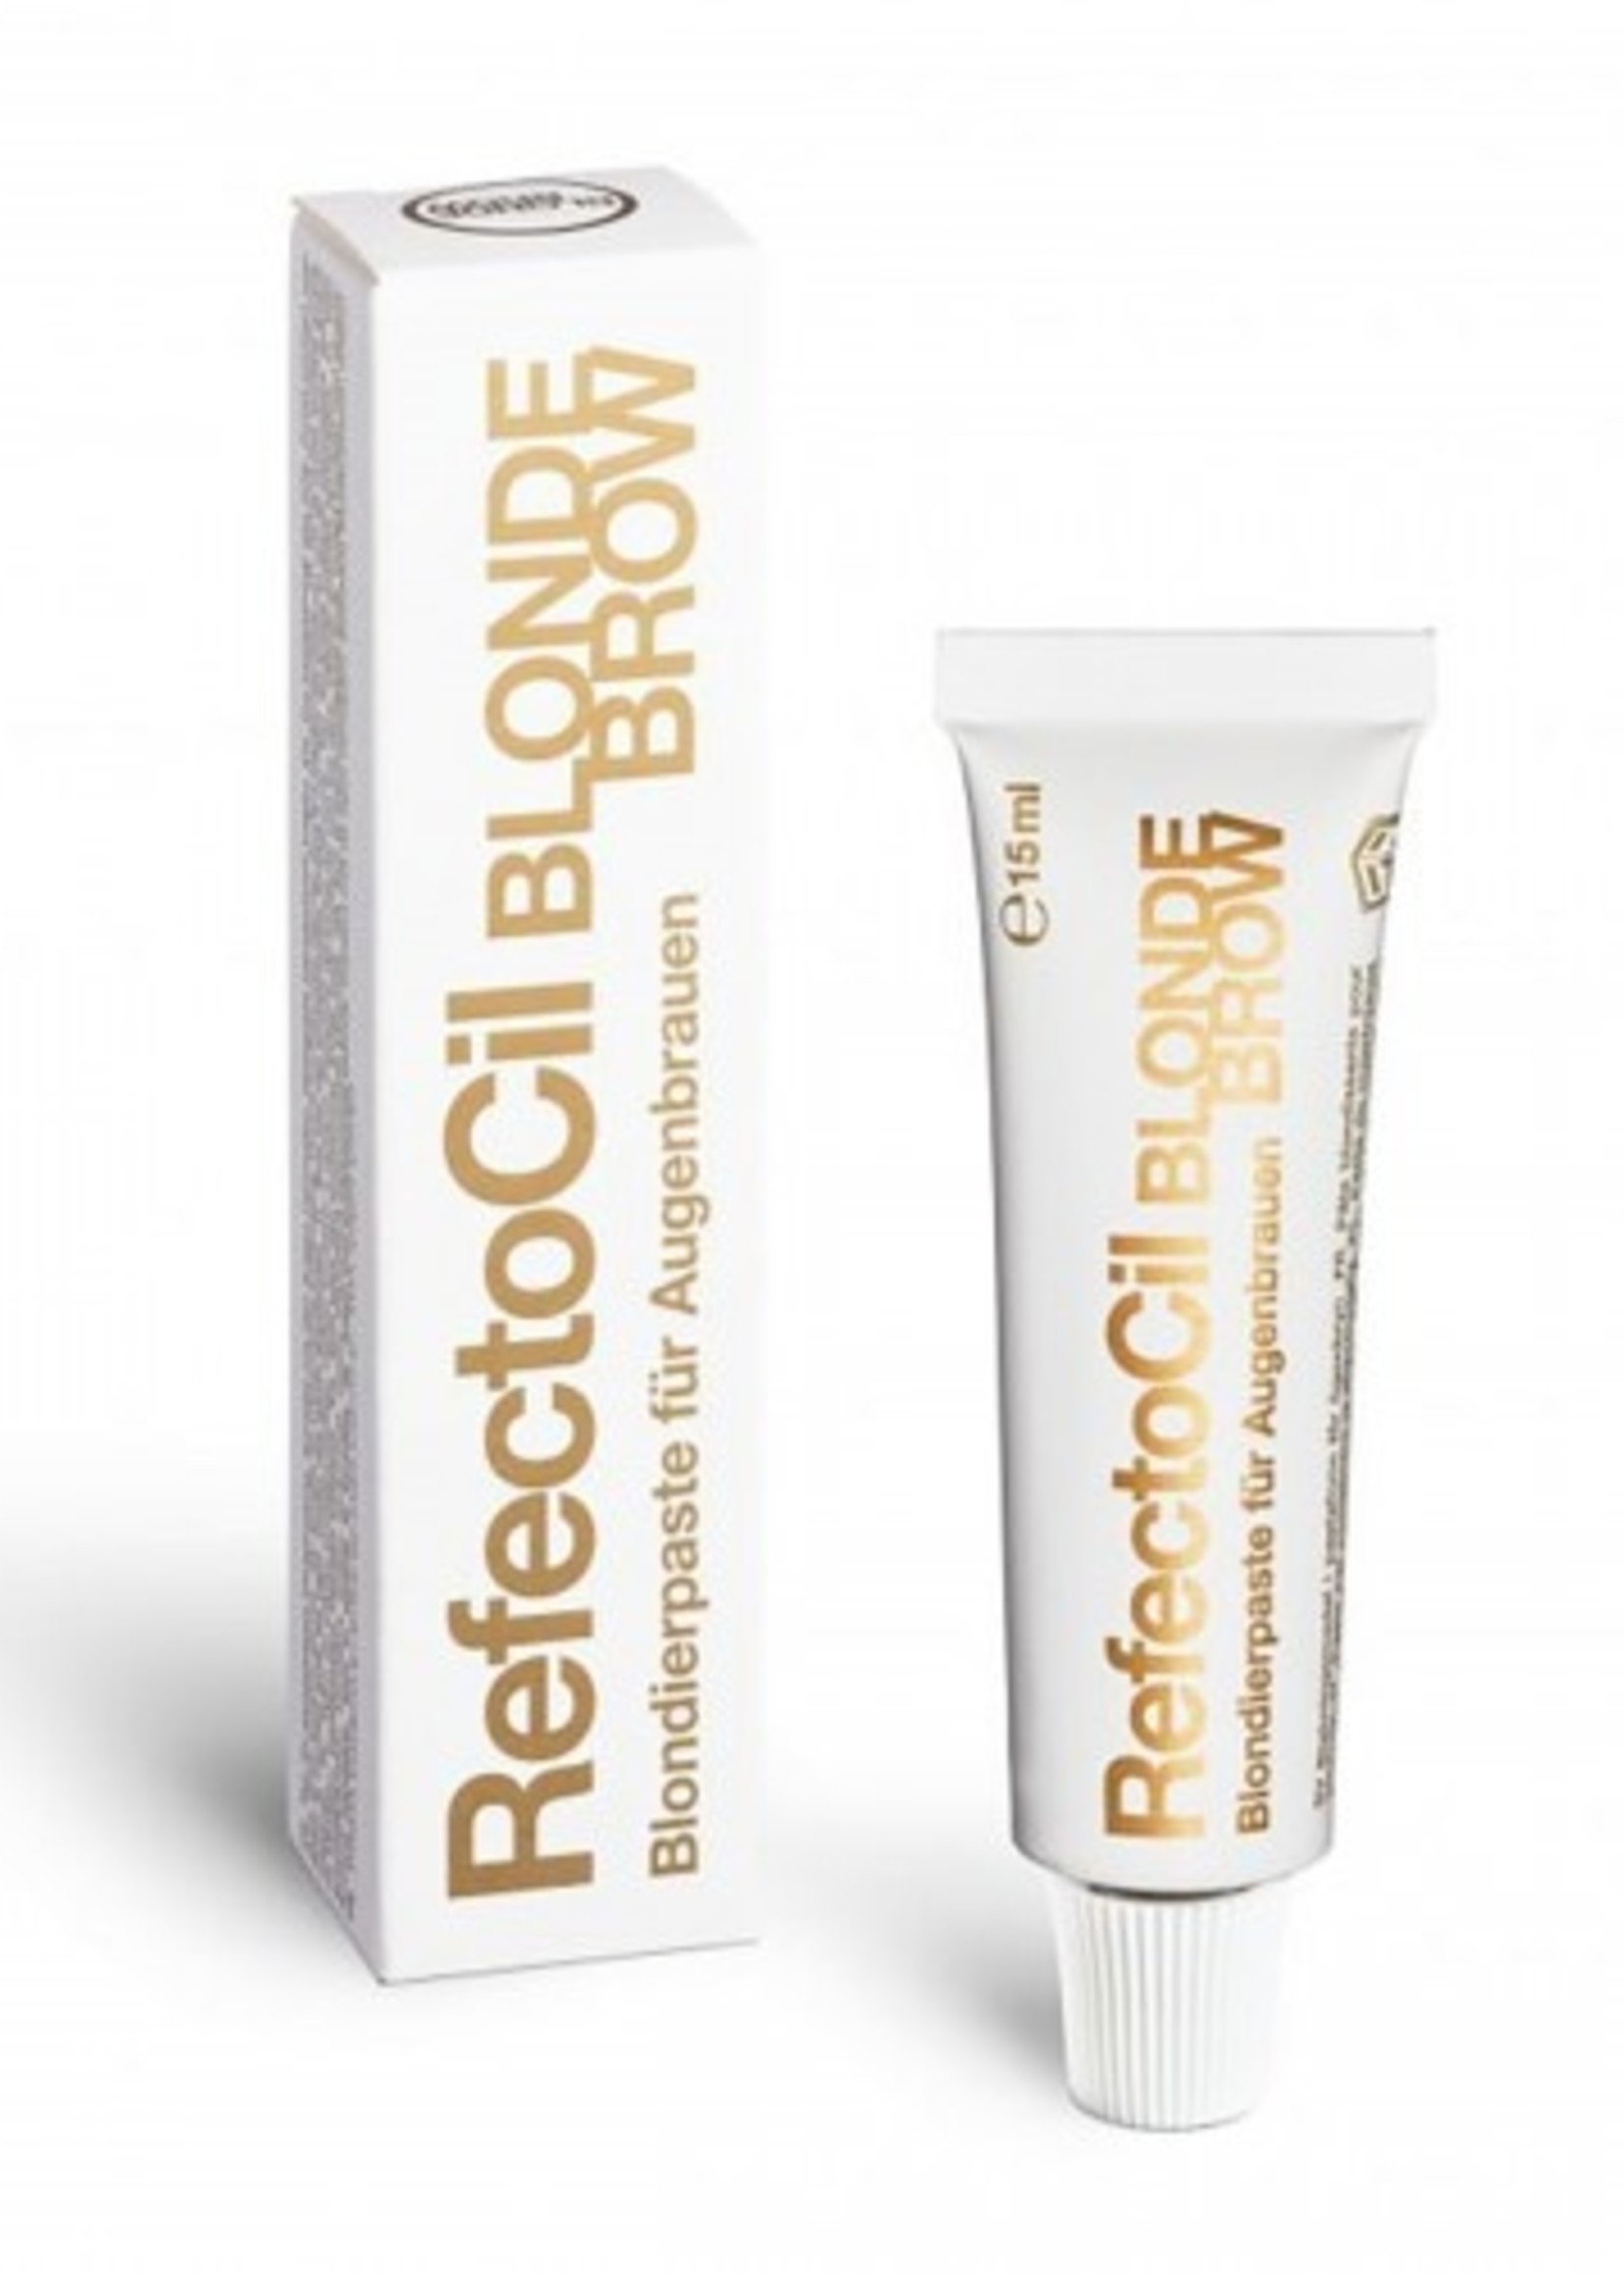 Refectocil Blond Brow Bleaching paste